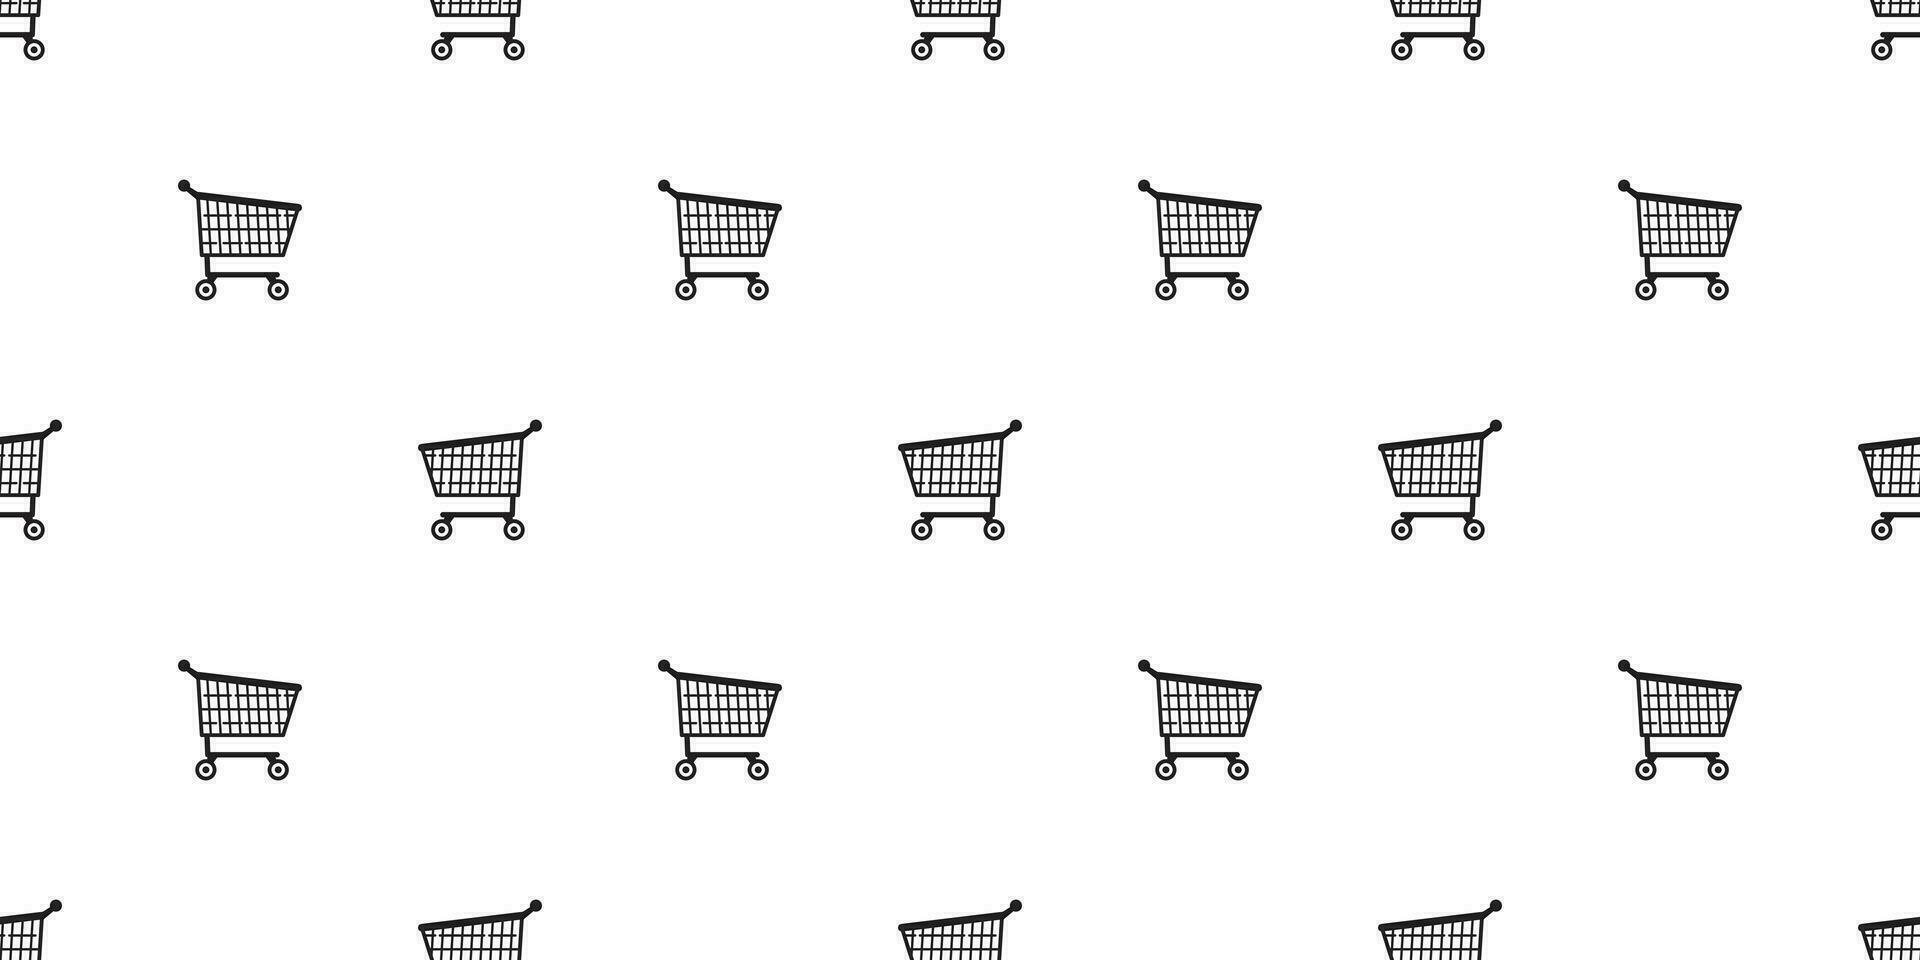 shopping cart seamless pattern vector basket bag gift wrap paper scarf isolated repeat wallpaper tile background illustration